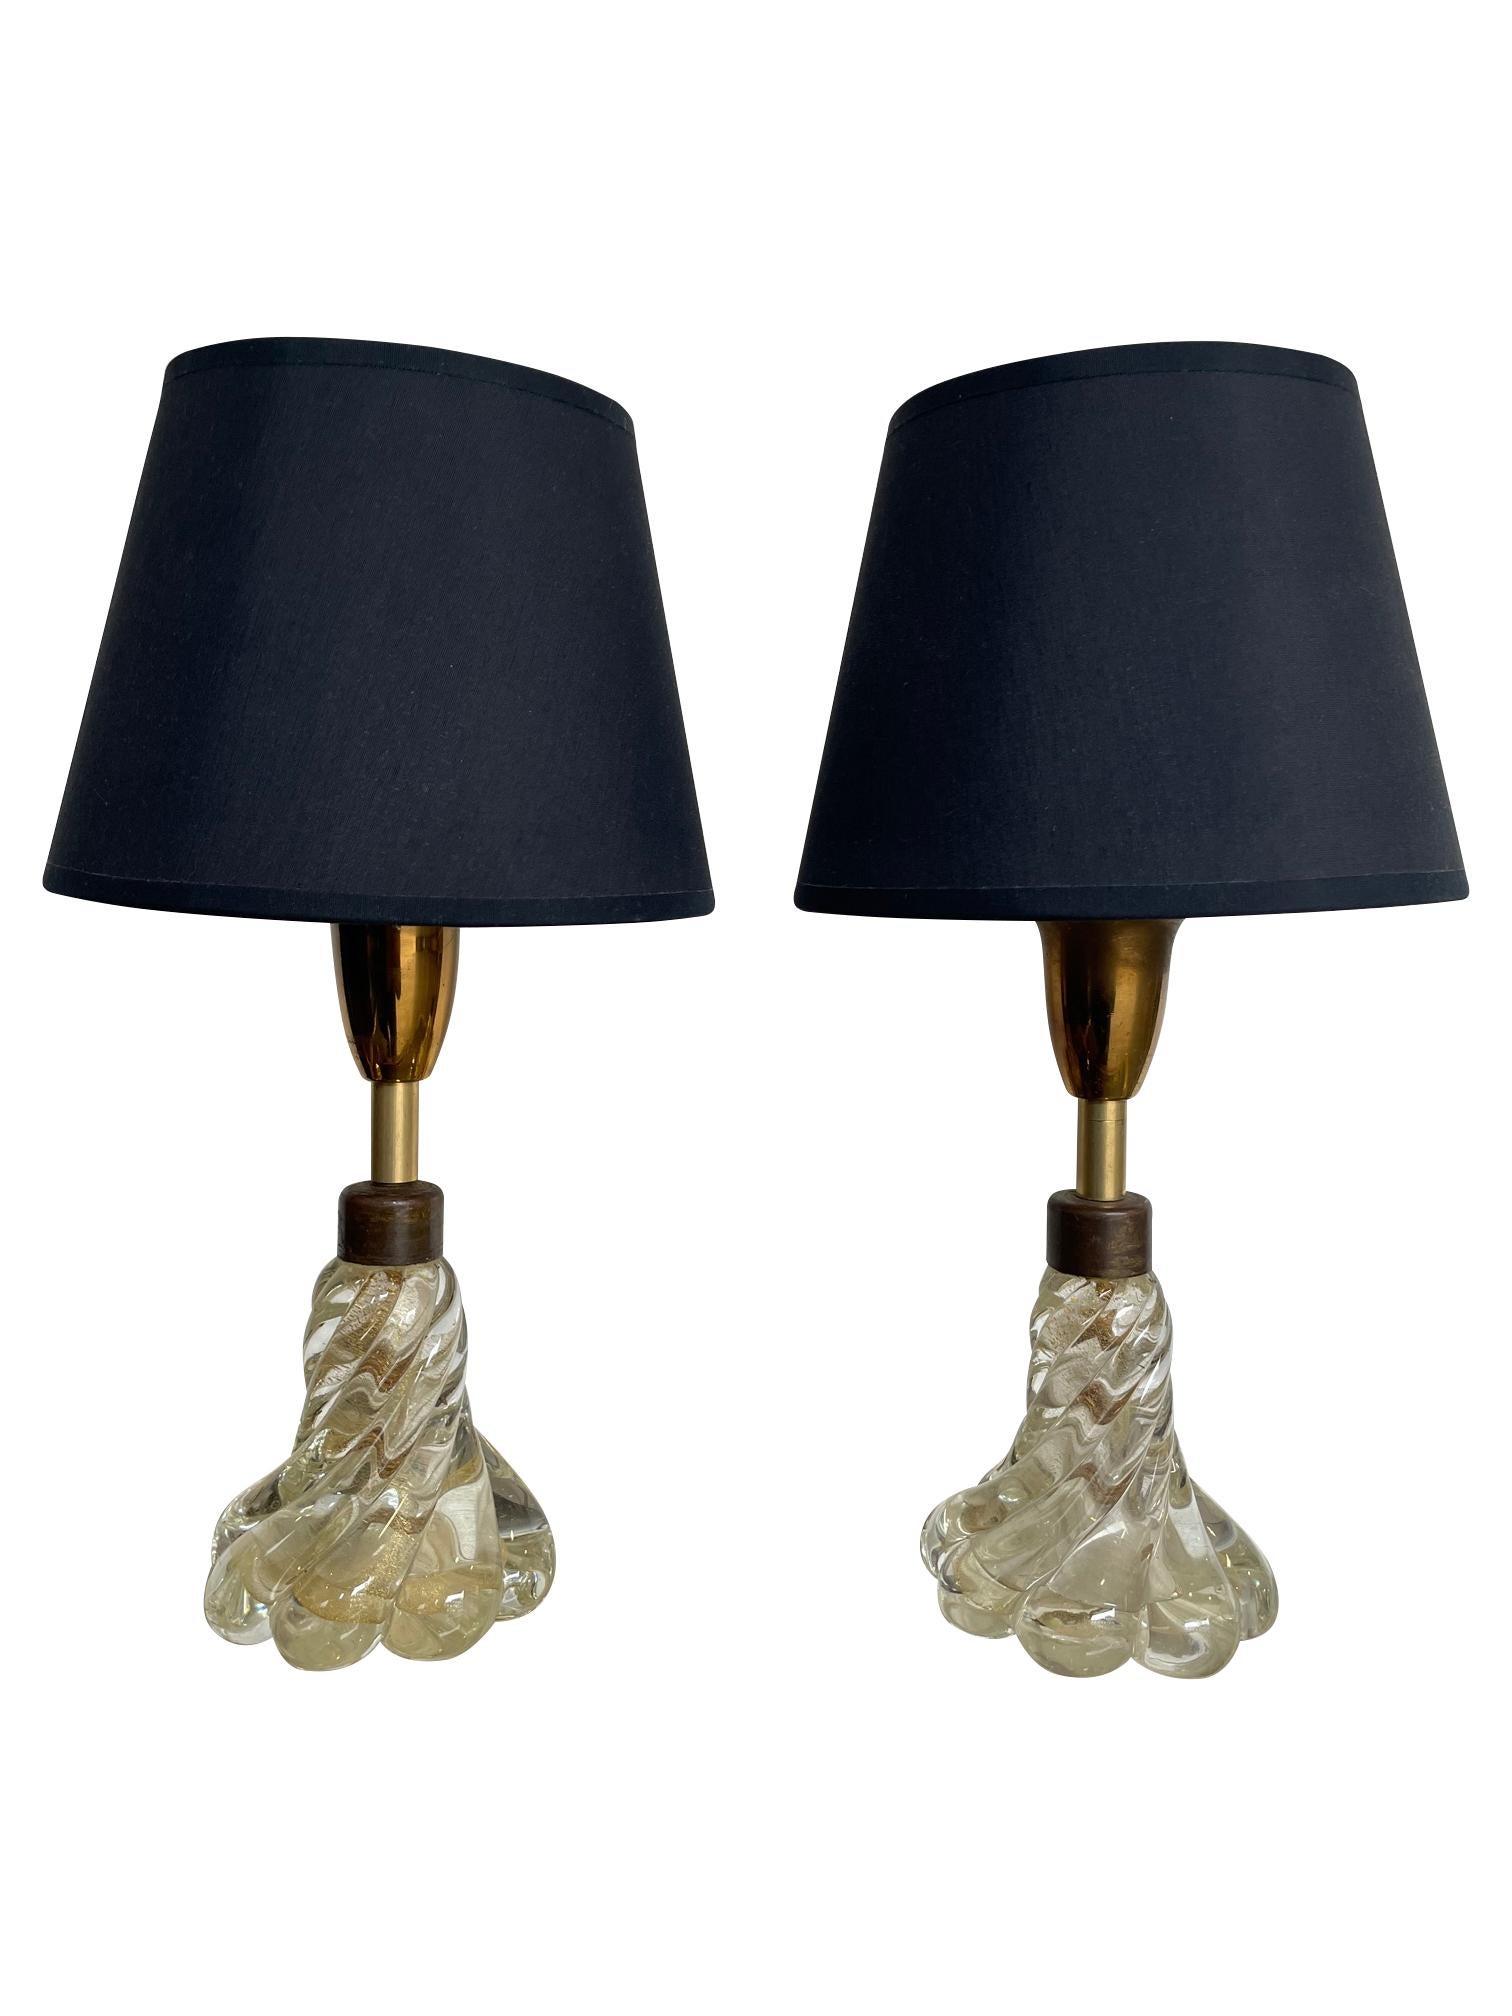 Italian Pretty Pair of 1950s Barovier & Toso Lamps with Murano Twisted Glass Base